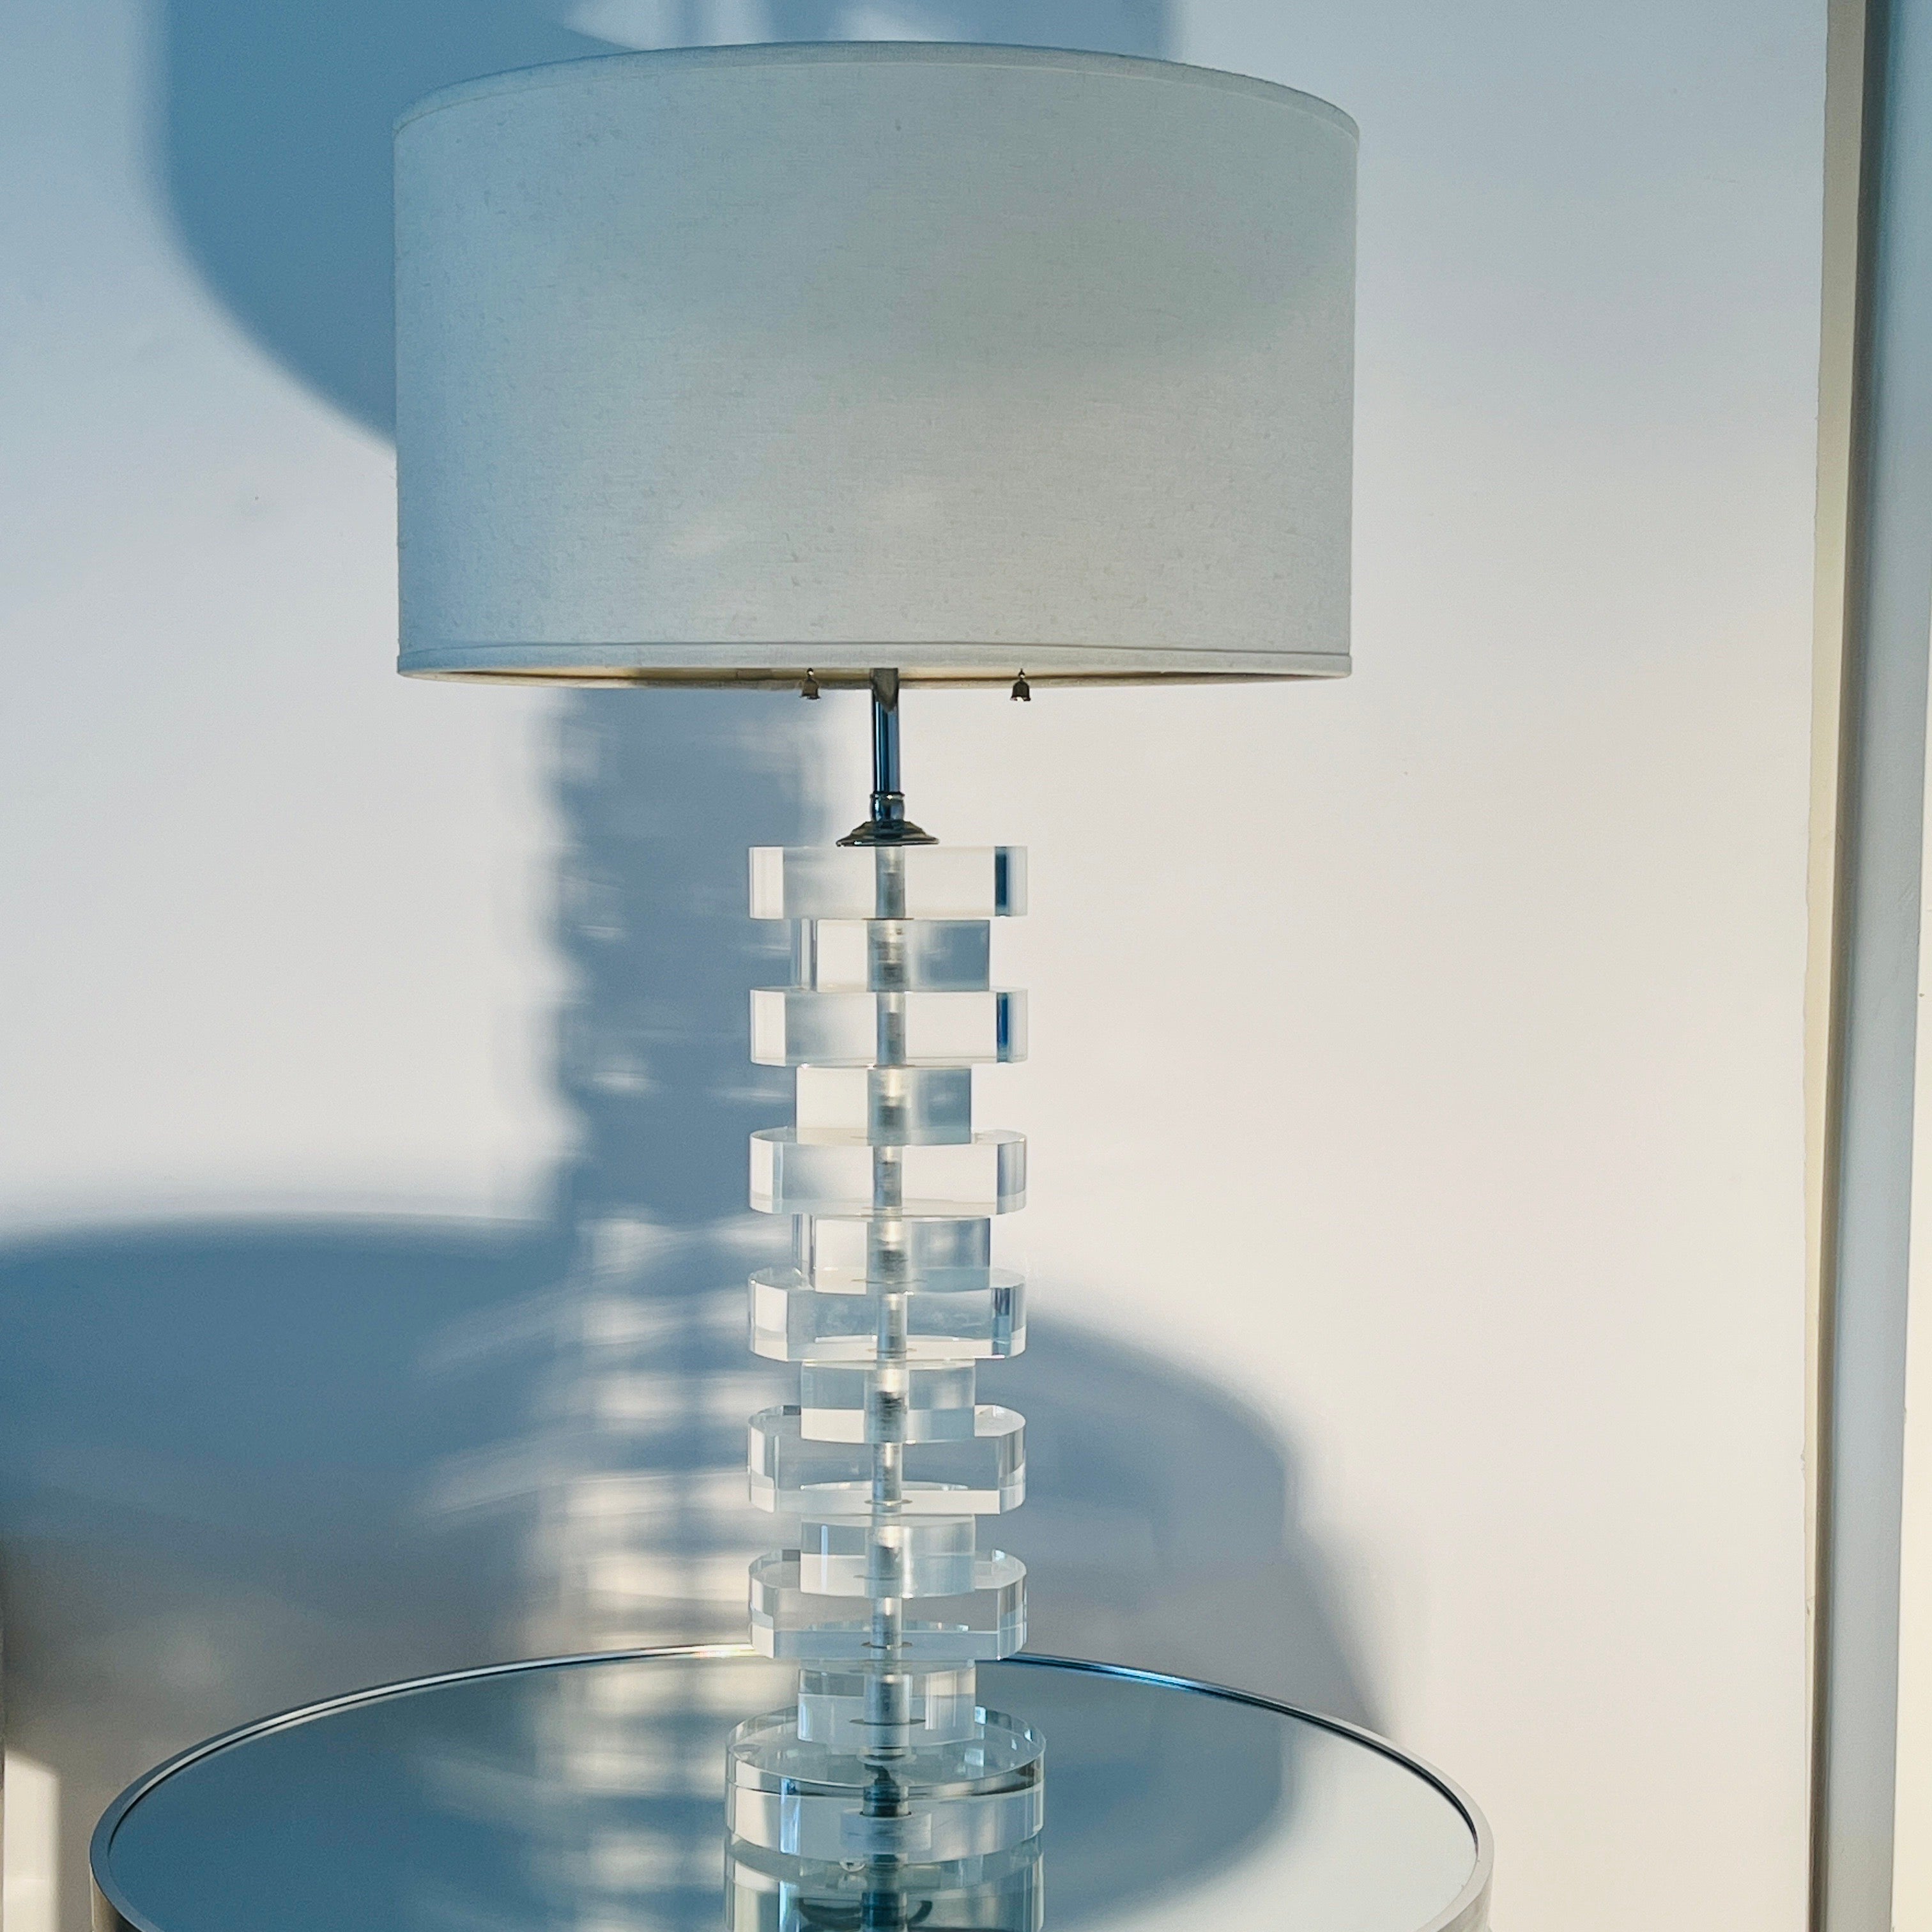 Mid-Century Modern lucite lamp comprised of stacked and beveled blocks of solid lucite.  Fitted with chrome metal stem with two lights and two pull chains. Includes linen drum shade in off-white.